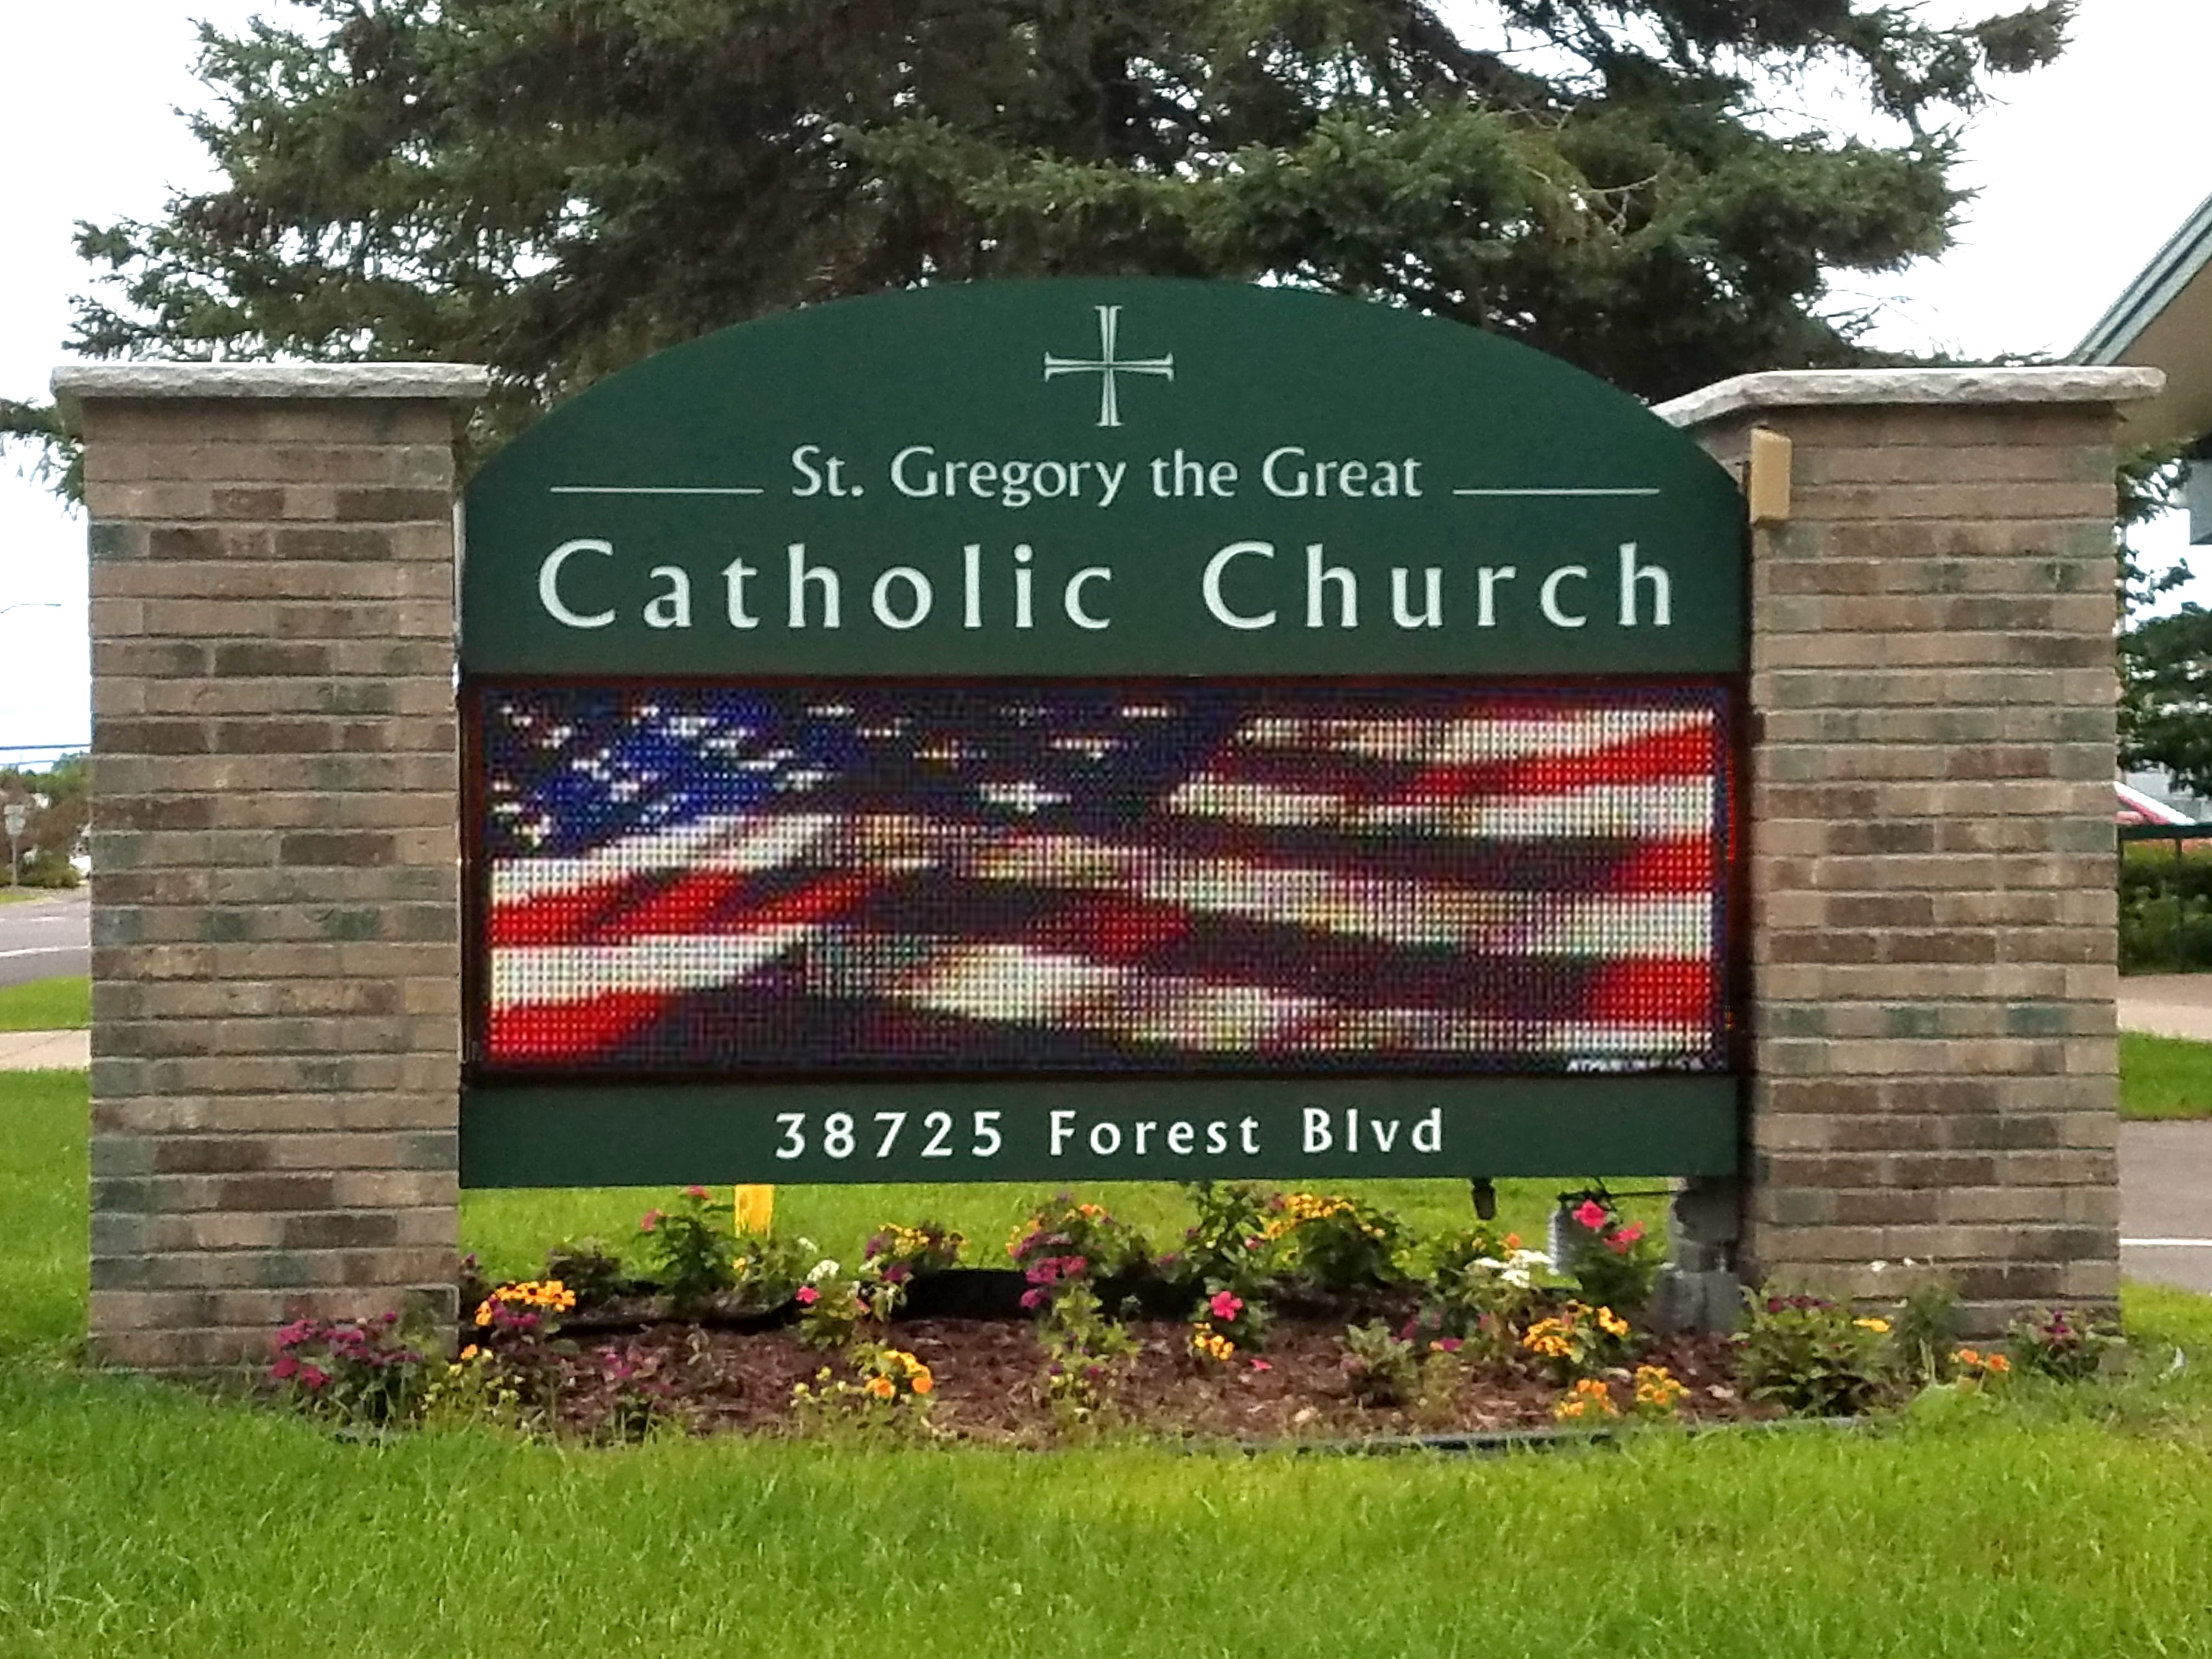 Digital Message Center Church Sign Company in Minneapolis - DeMars Signs in Coon Rapids Minnesota